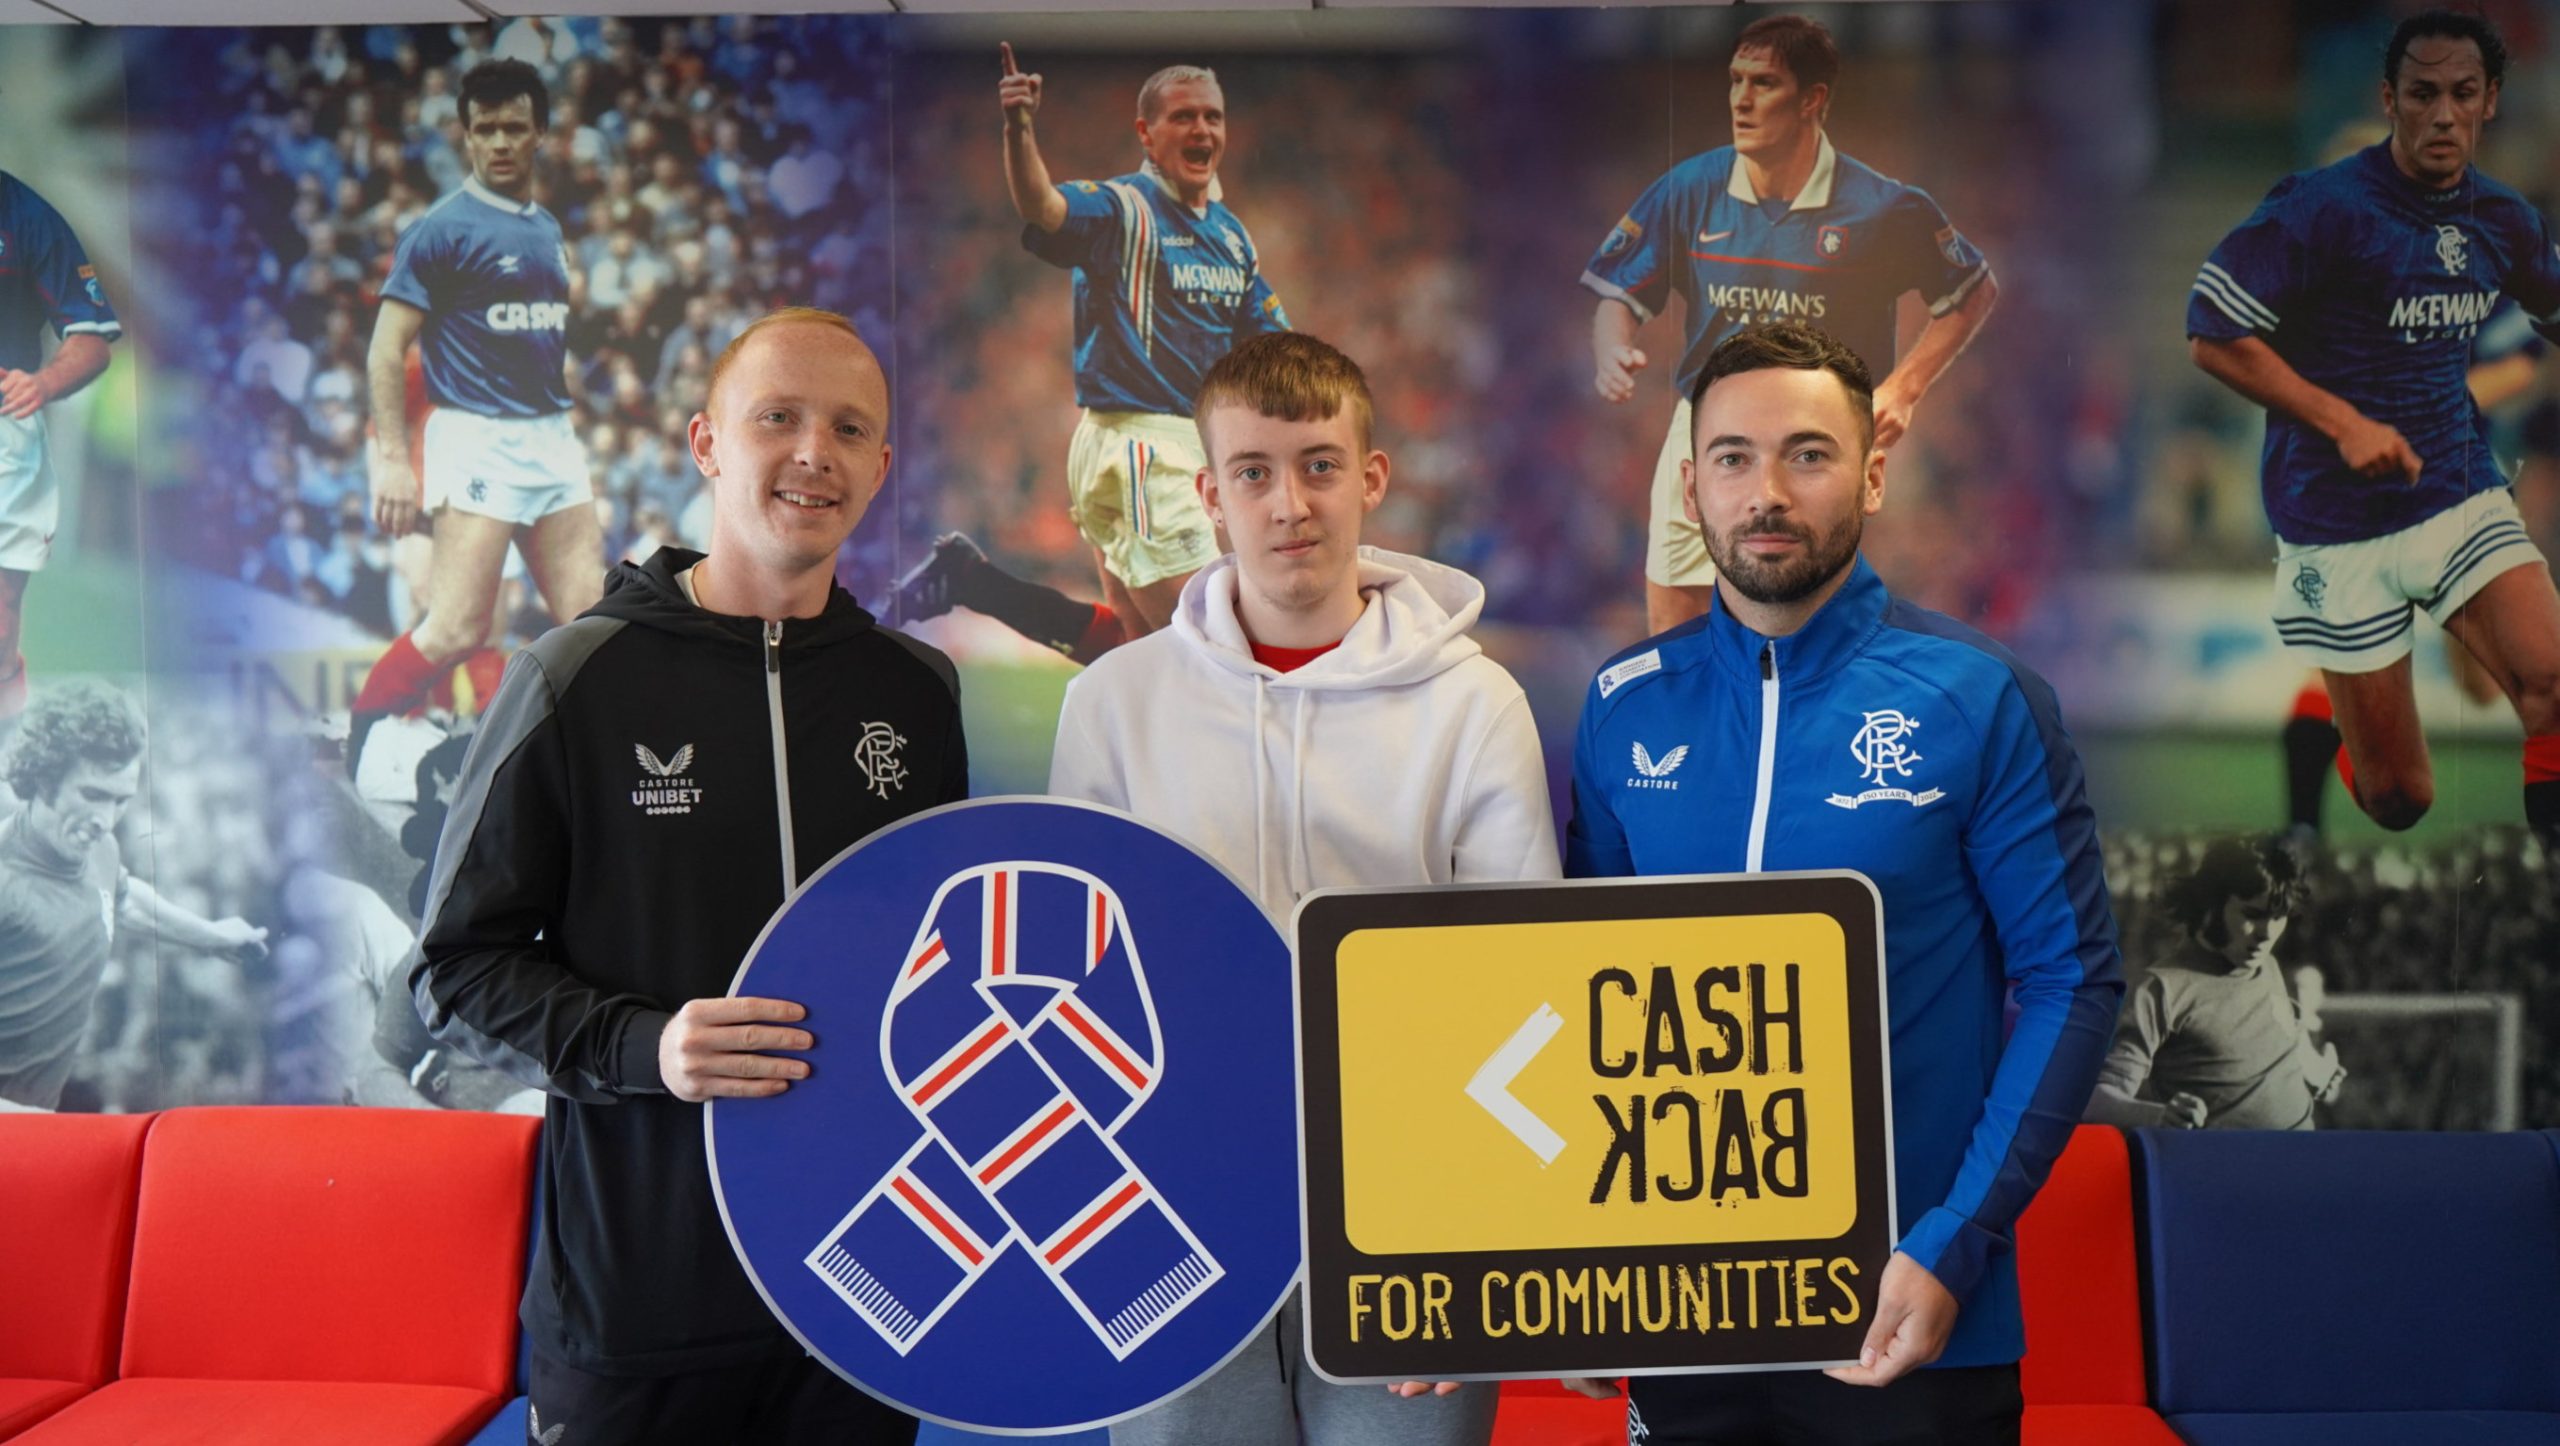 Brighter Future Ahead For CashBack For Communities Participant Aaron